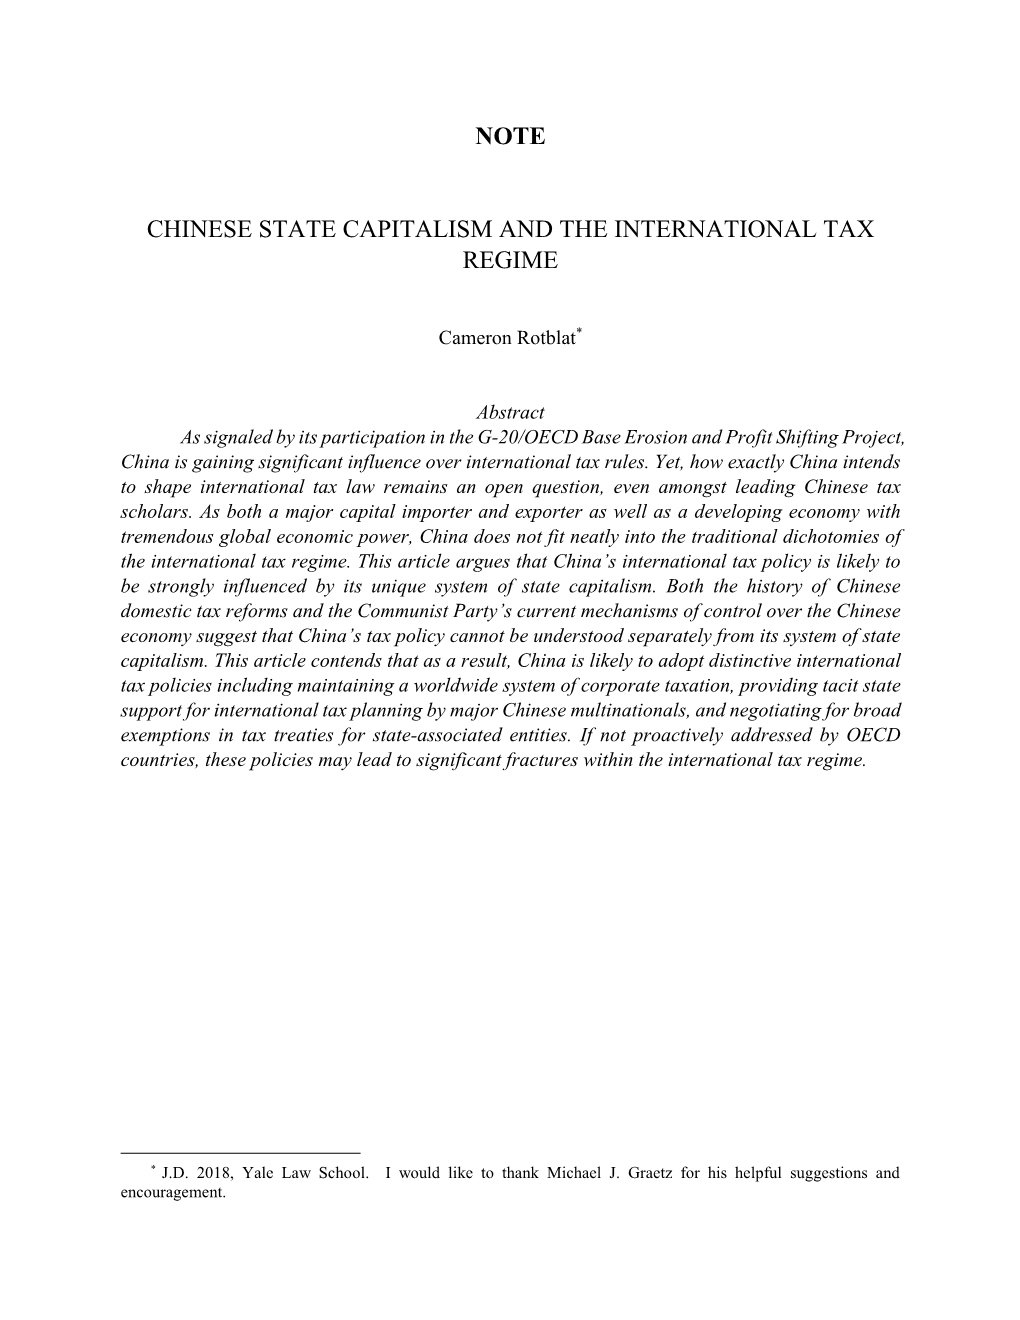 Note Chinese State Capitalism and the International Tax